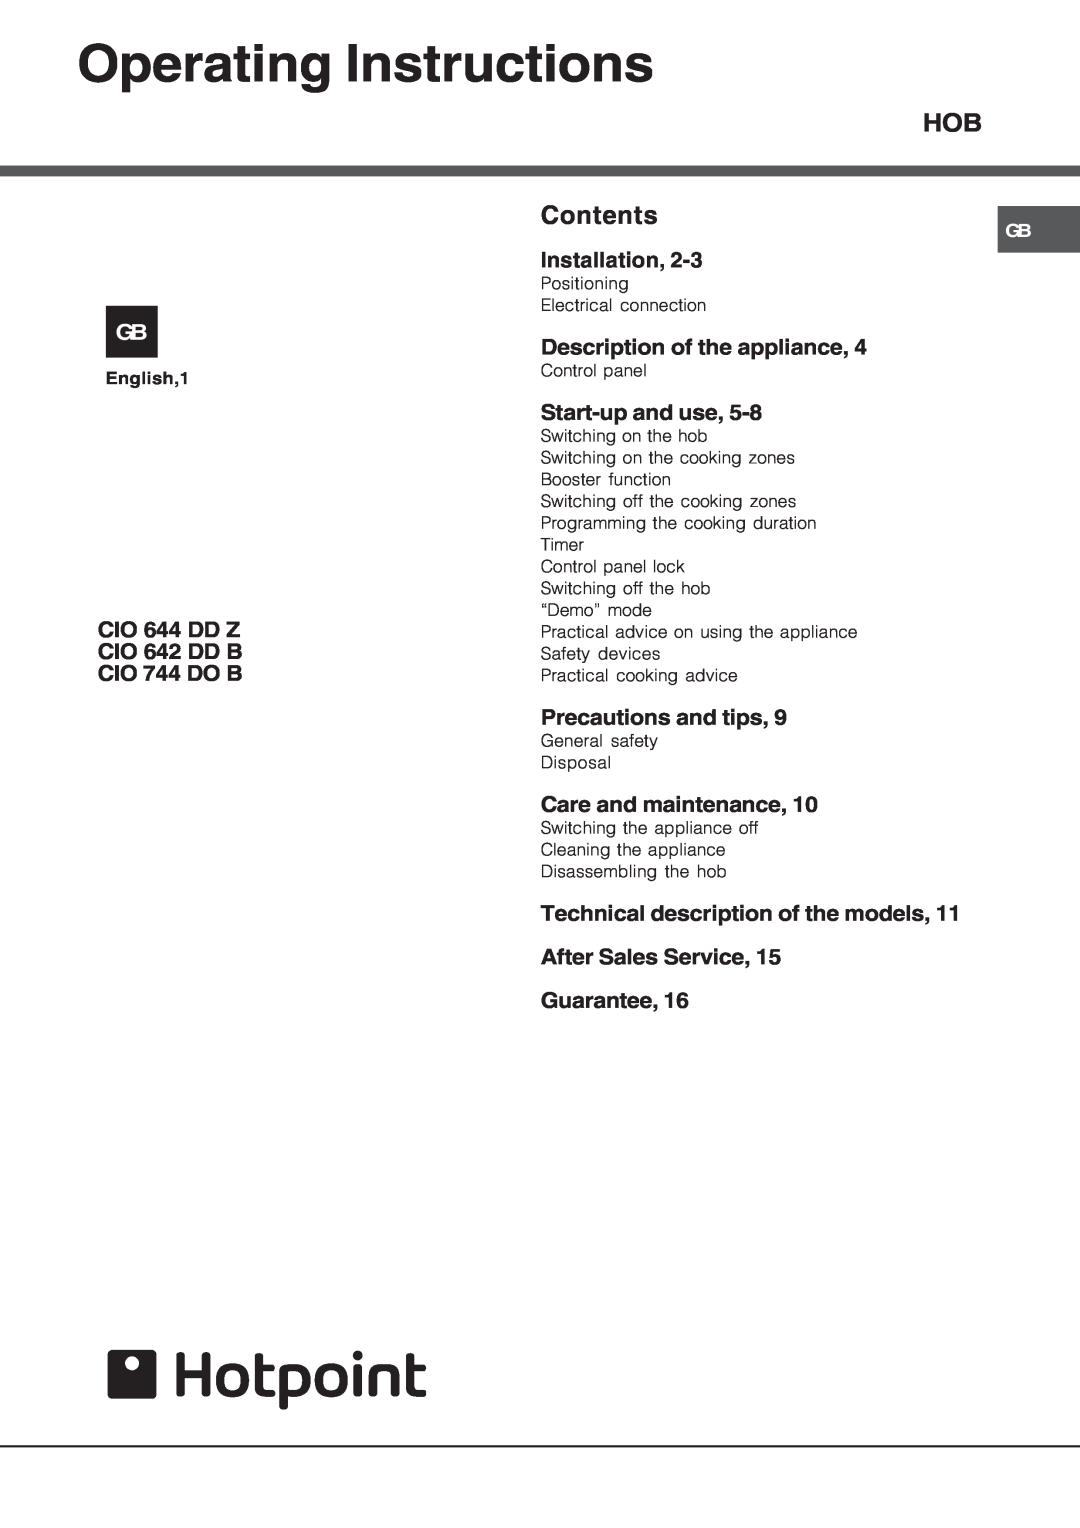 Hotpoint CIO 642 DD B operating instructions Operating Instructions, Installation, Description of the appliance, Contents 